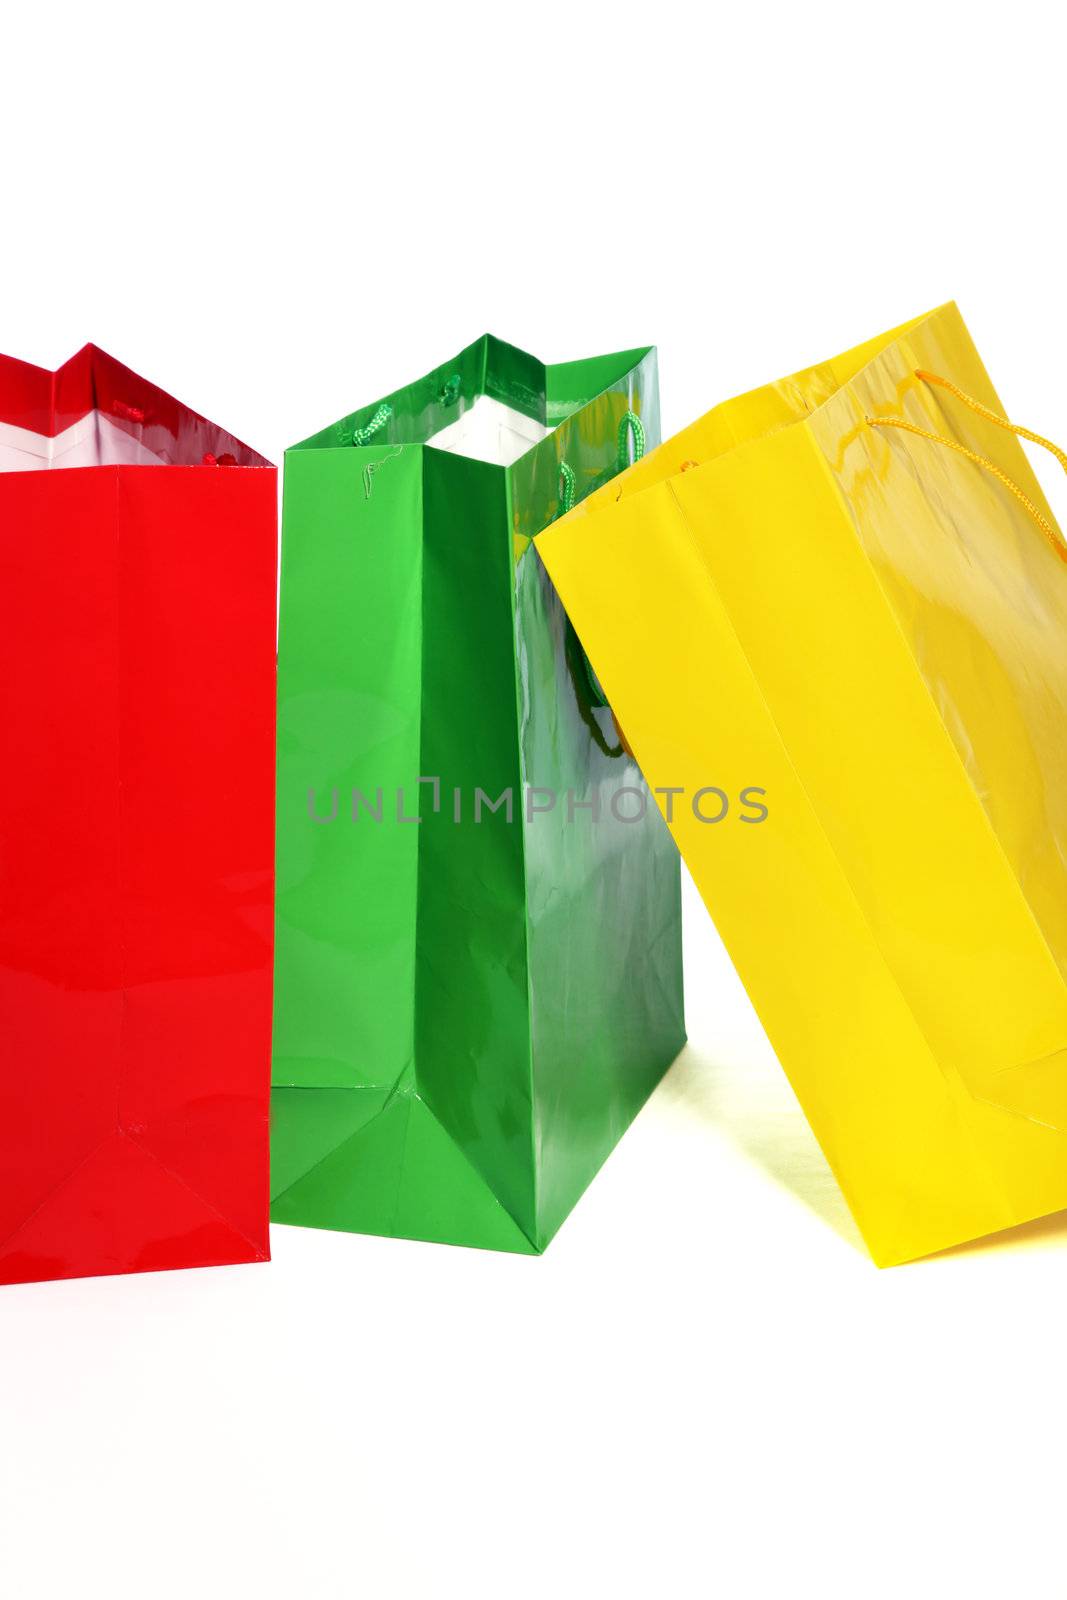 Bright colourful shopping bags by Farina6000